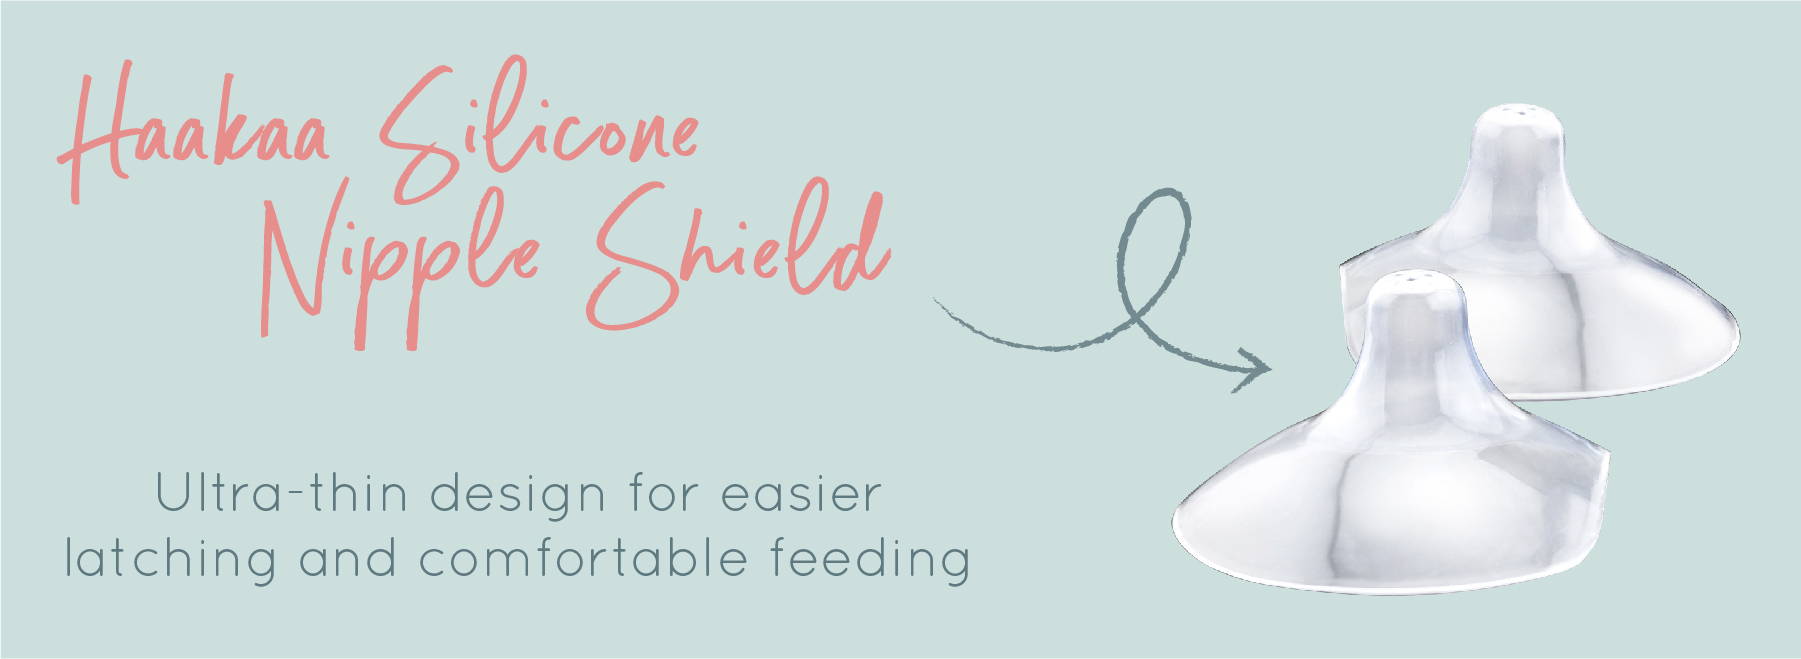 How to use a nipple shield CORRECTLY to overcome breastfeeding challen